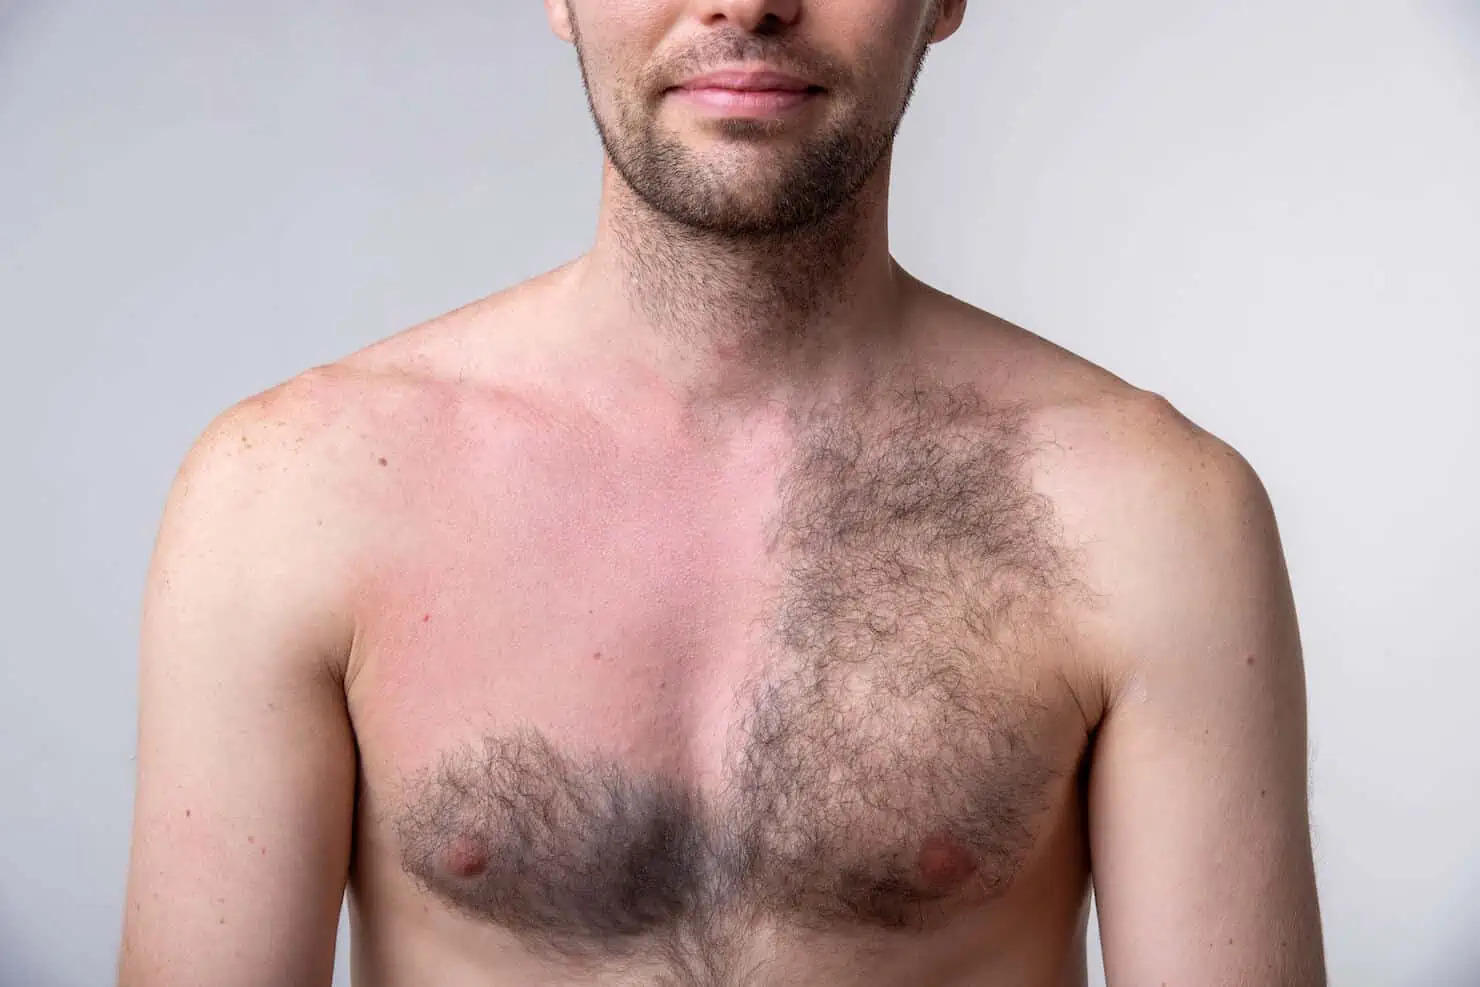 What Are The Most Frequent Hair Removal Requests From Men?